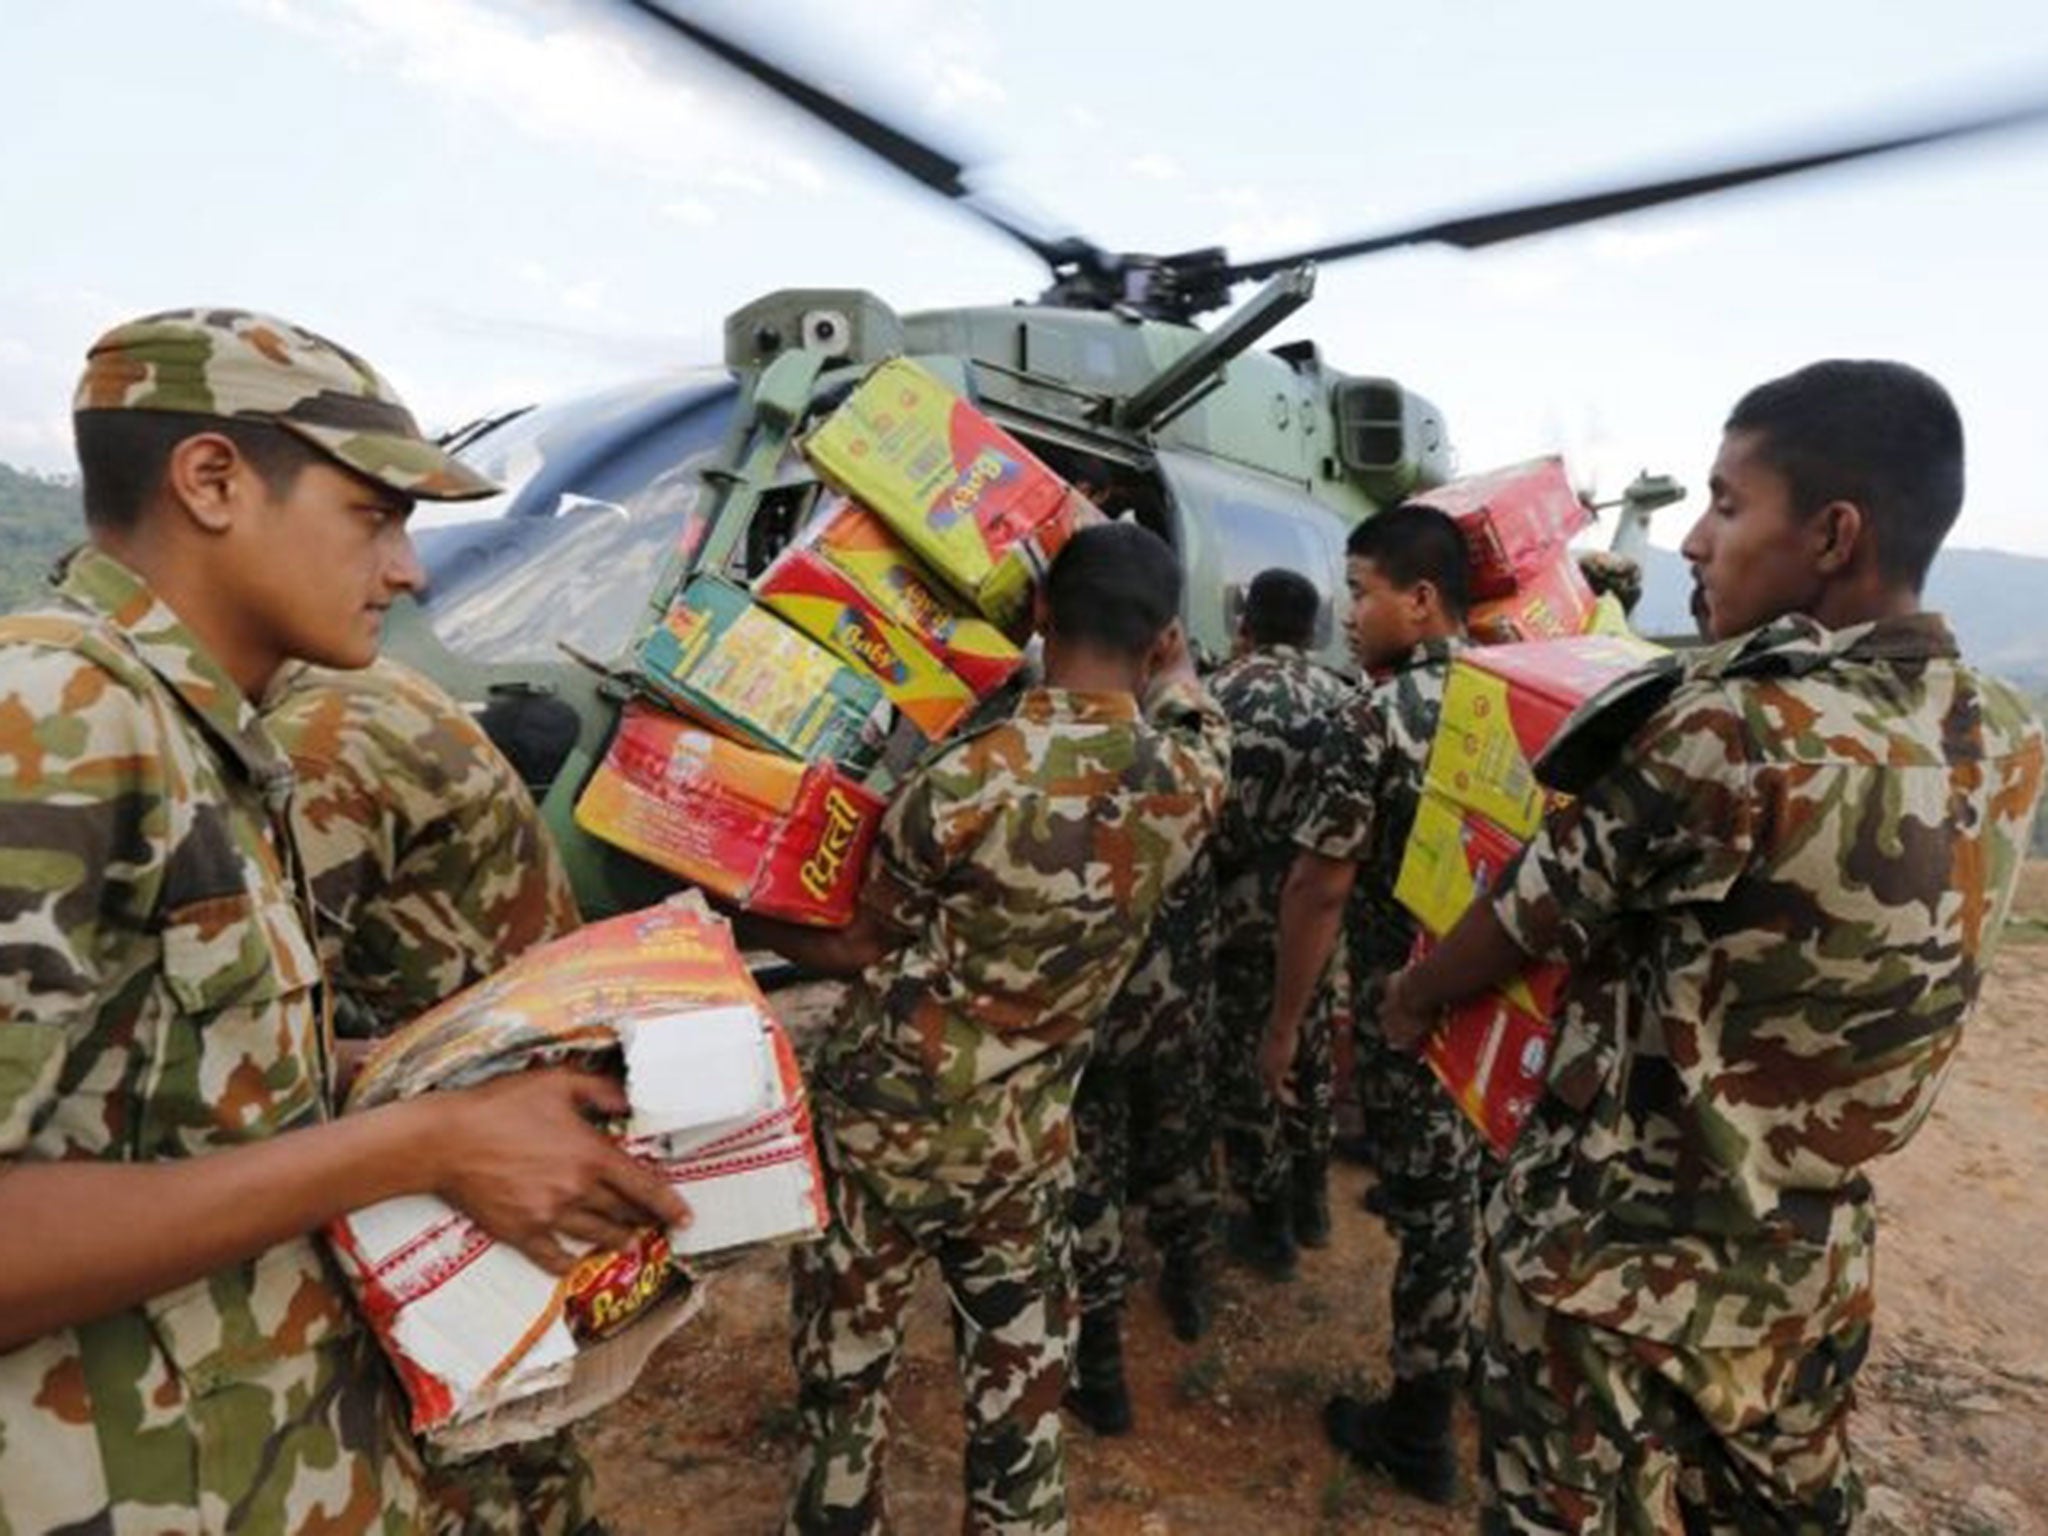 Relief packages sent from Pakistan cannot be used in Nepal because the nation is deeply Hindu